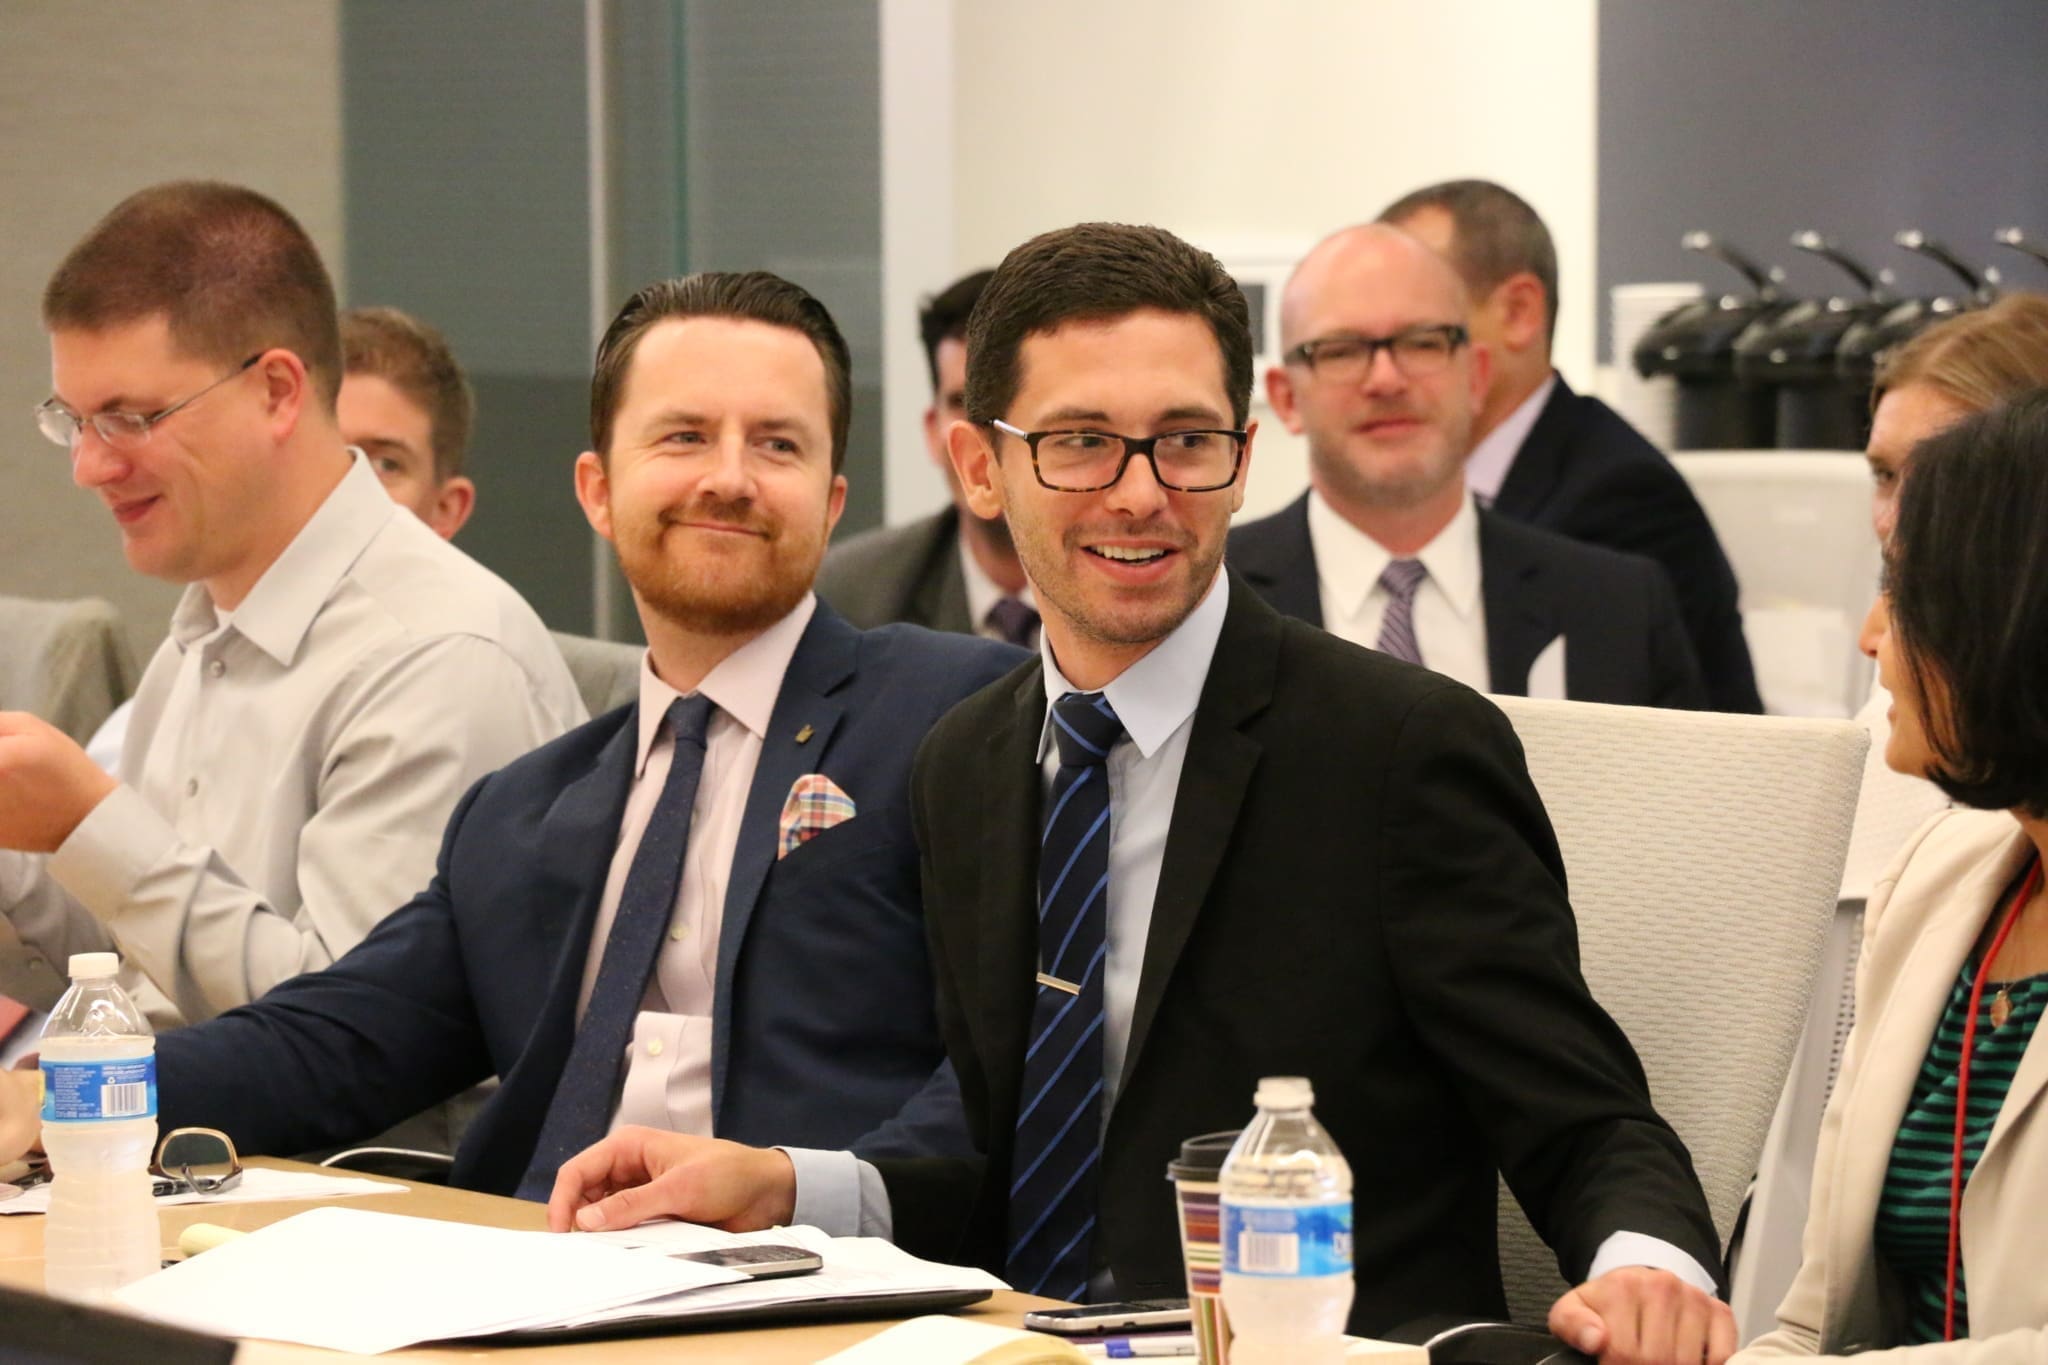 Rhett Buttle (third from left), HHS director of private sector engagement, spoke about the upcoming Health Insurance Marketplace open enrollment at the NACDS Policy Council meeting this week.